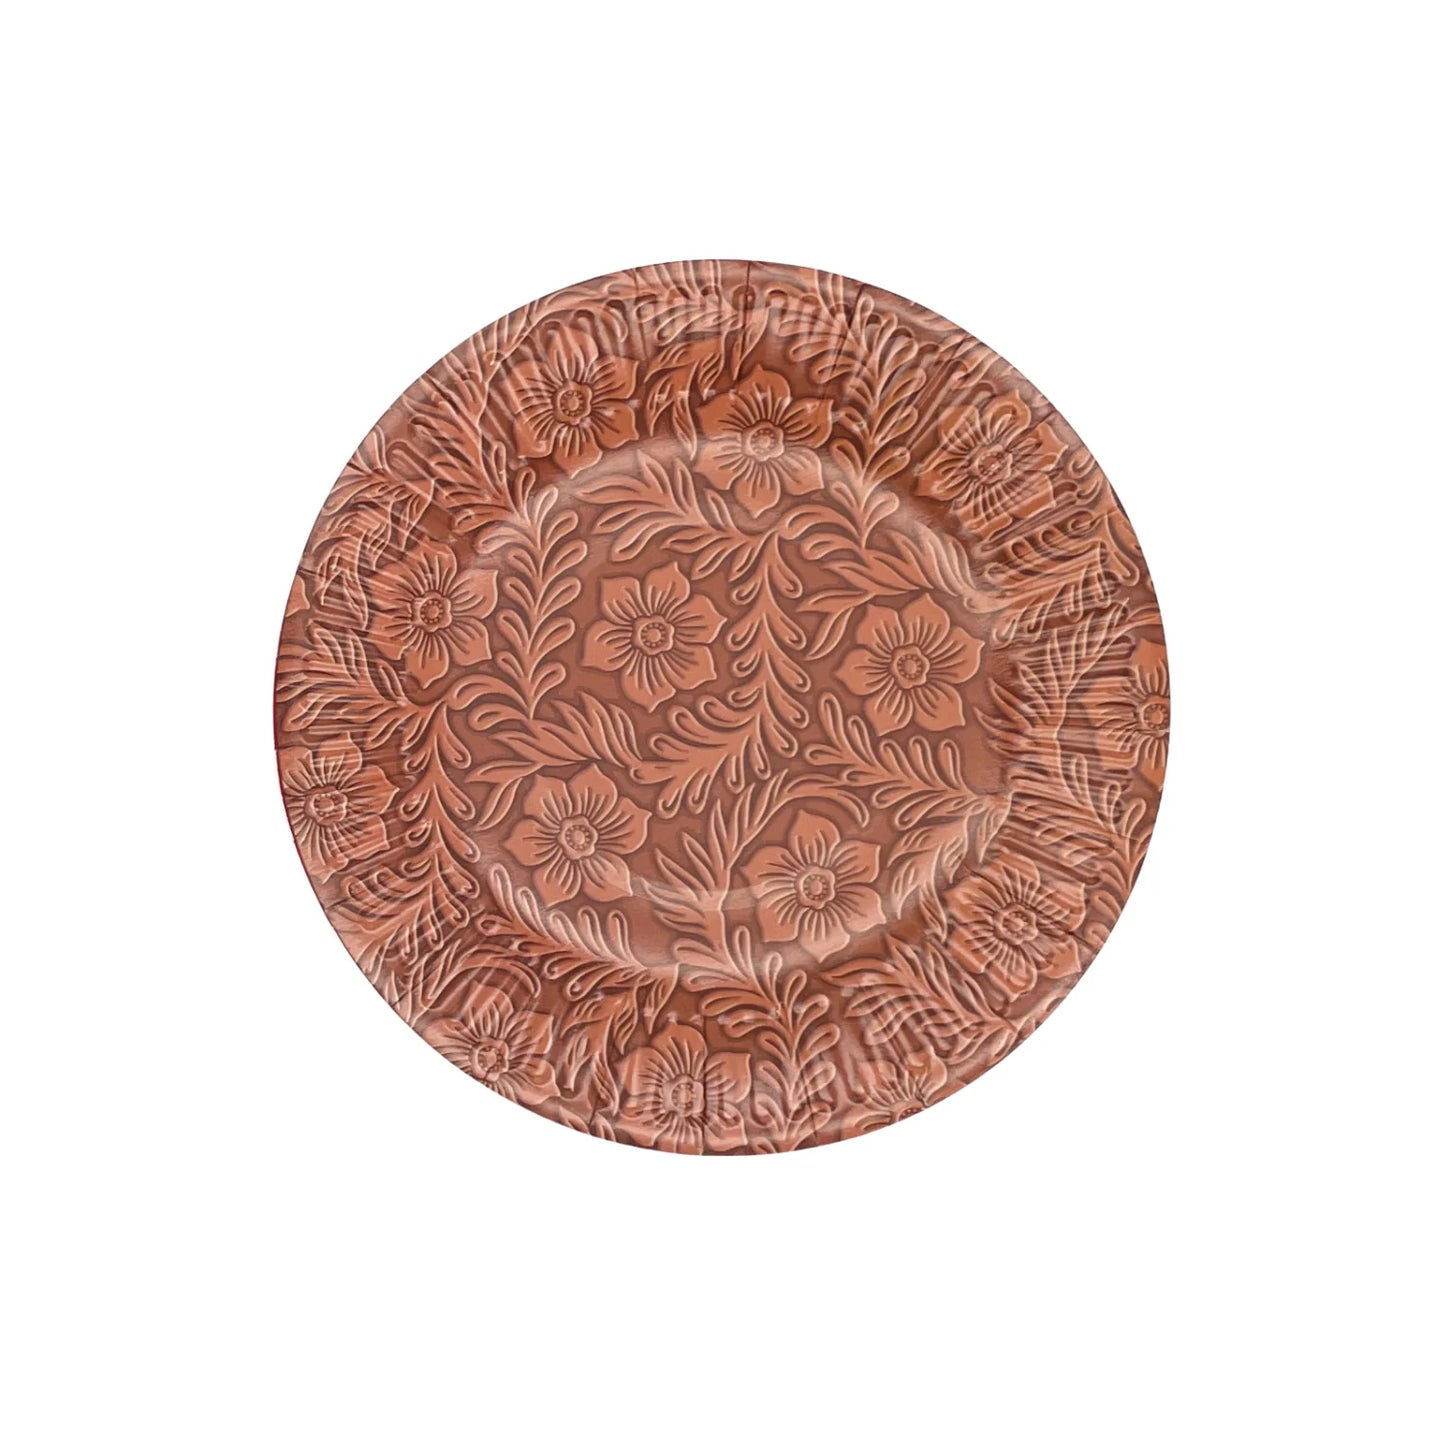 The Floral Tooled Leather Dessert Plates (8 pack)